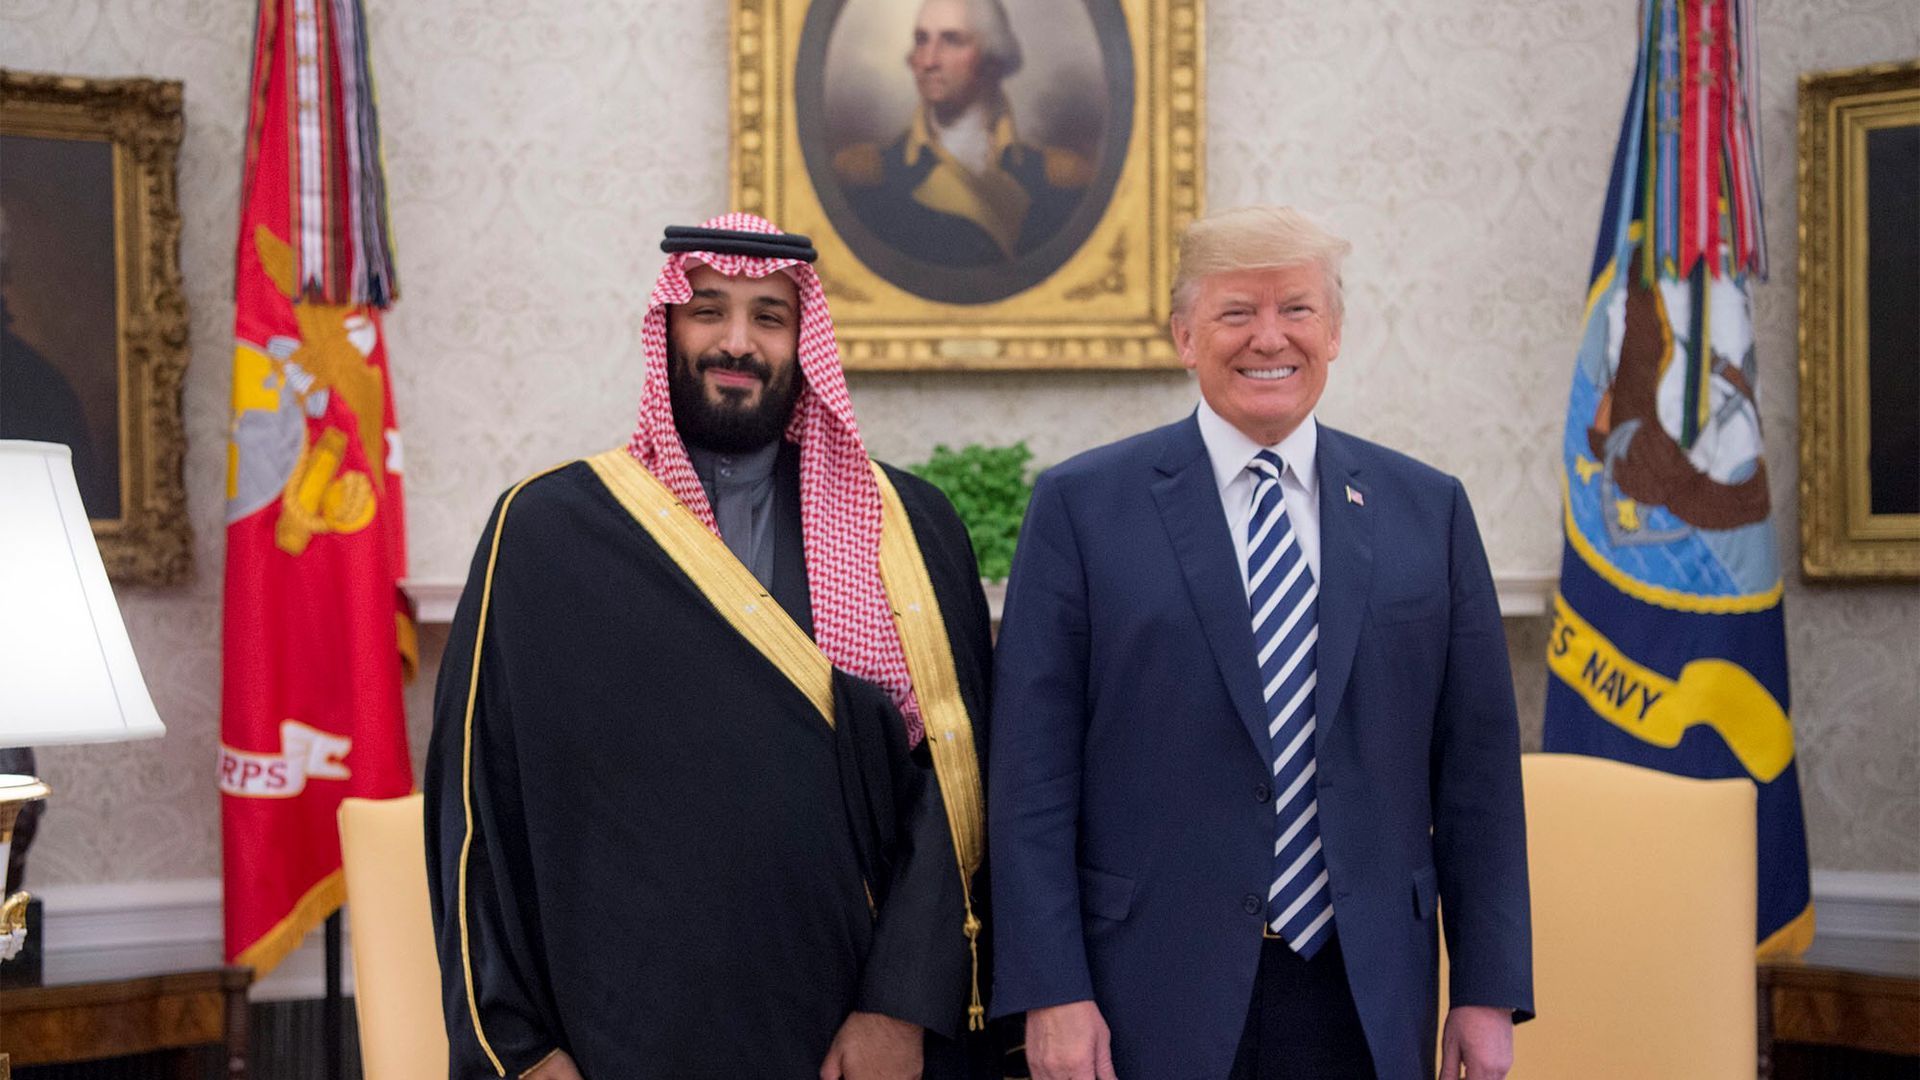 Saudi Crown Prince Mohammed bin Salman stands beside President Trump at the White House